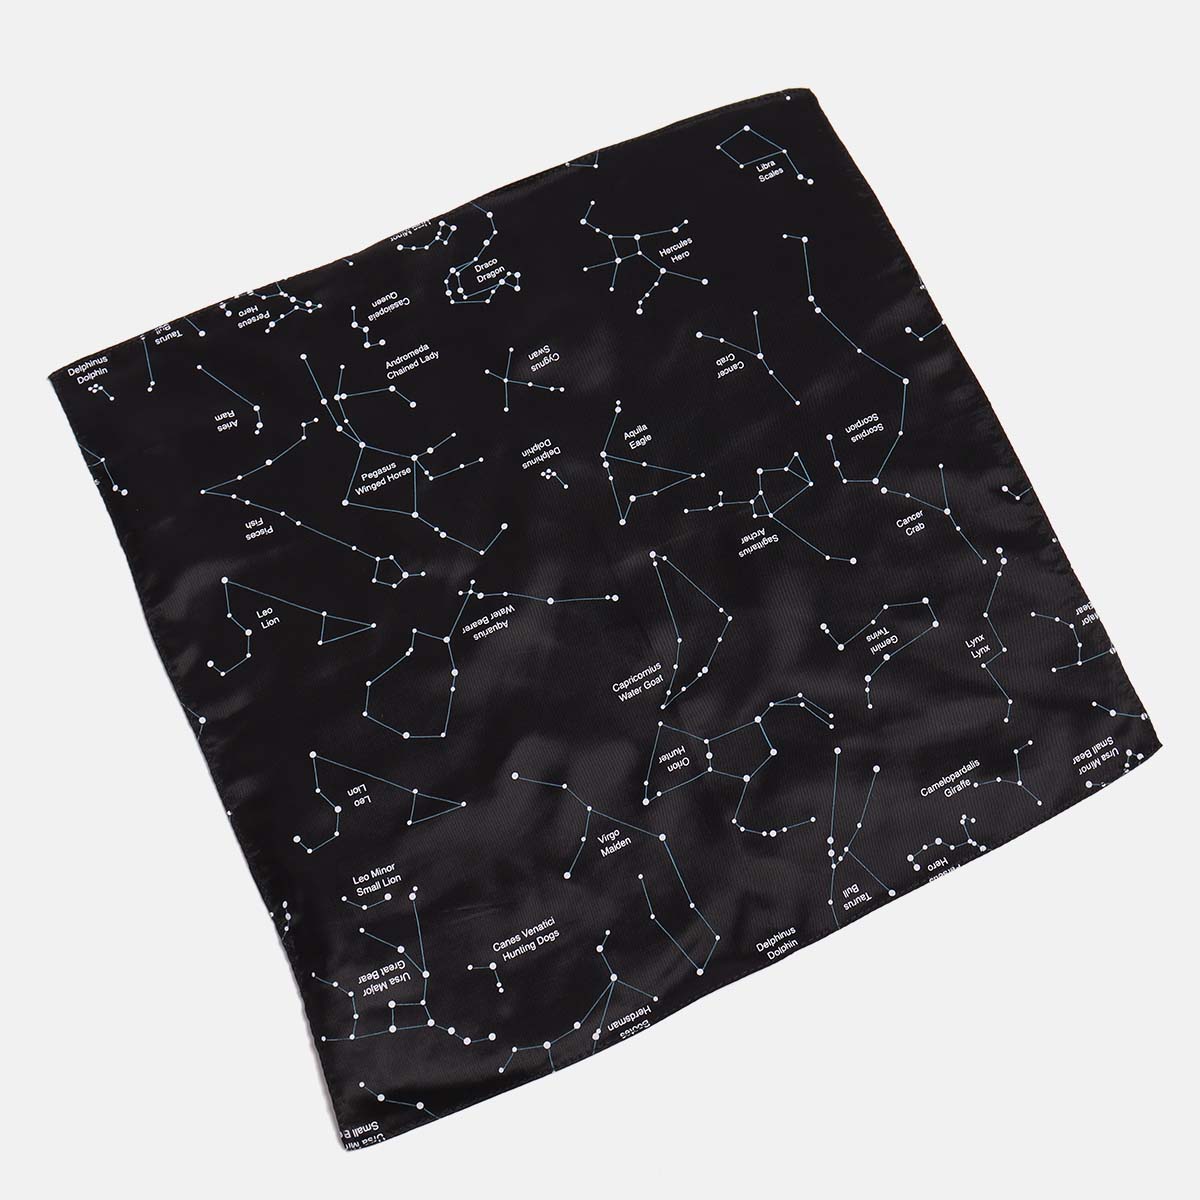 Black constellation pocket square by Kirrin Finch. It is 13 by 13 on a neutral background